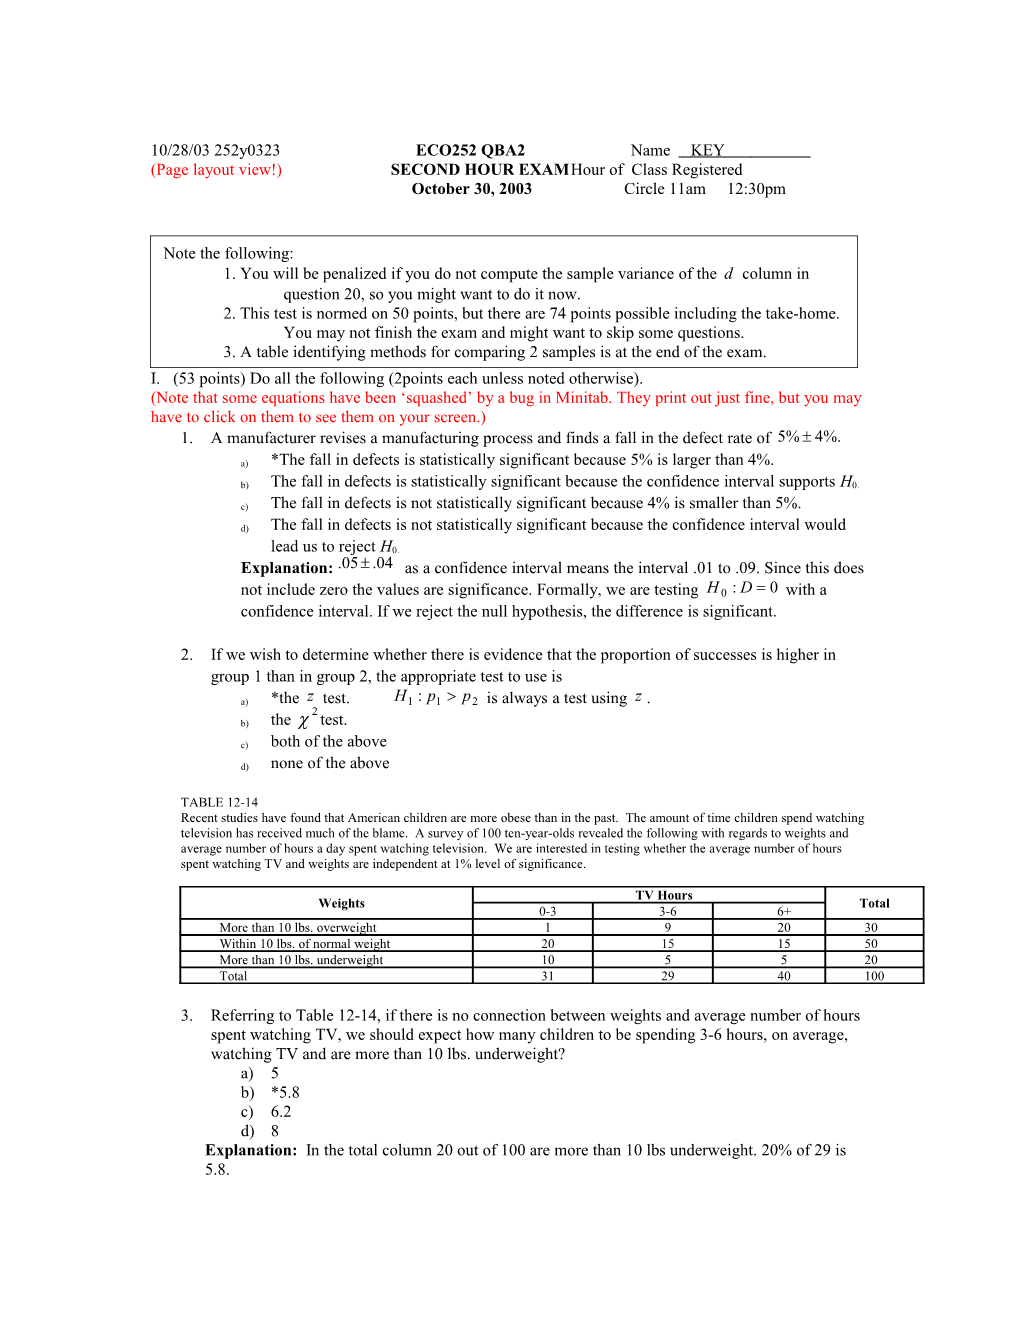 (Page Layout View!) SECOND HOUR EXAM Hour of Class Registered